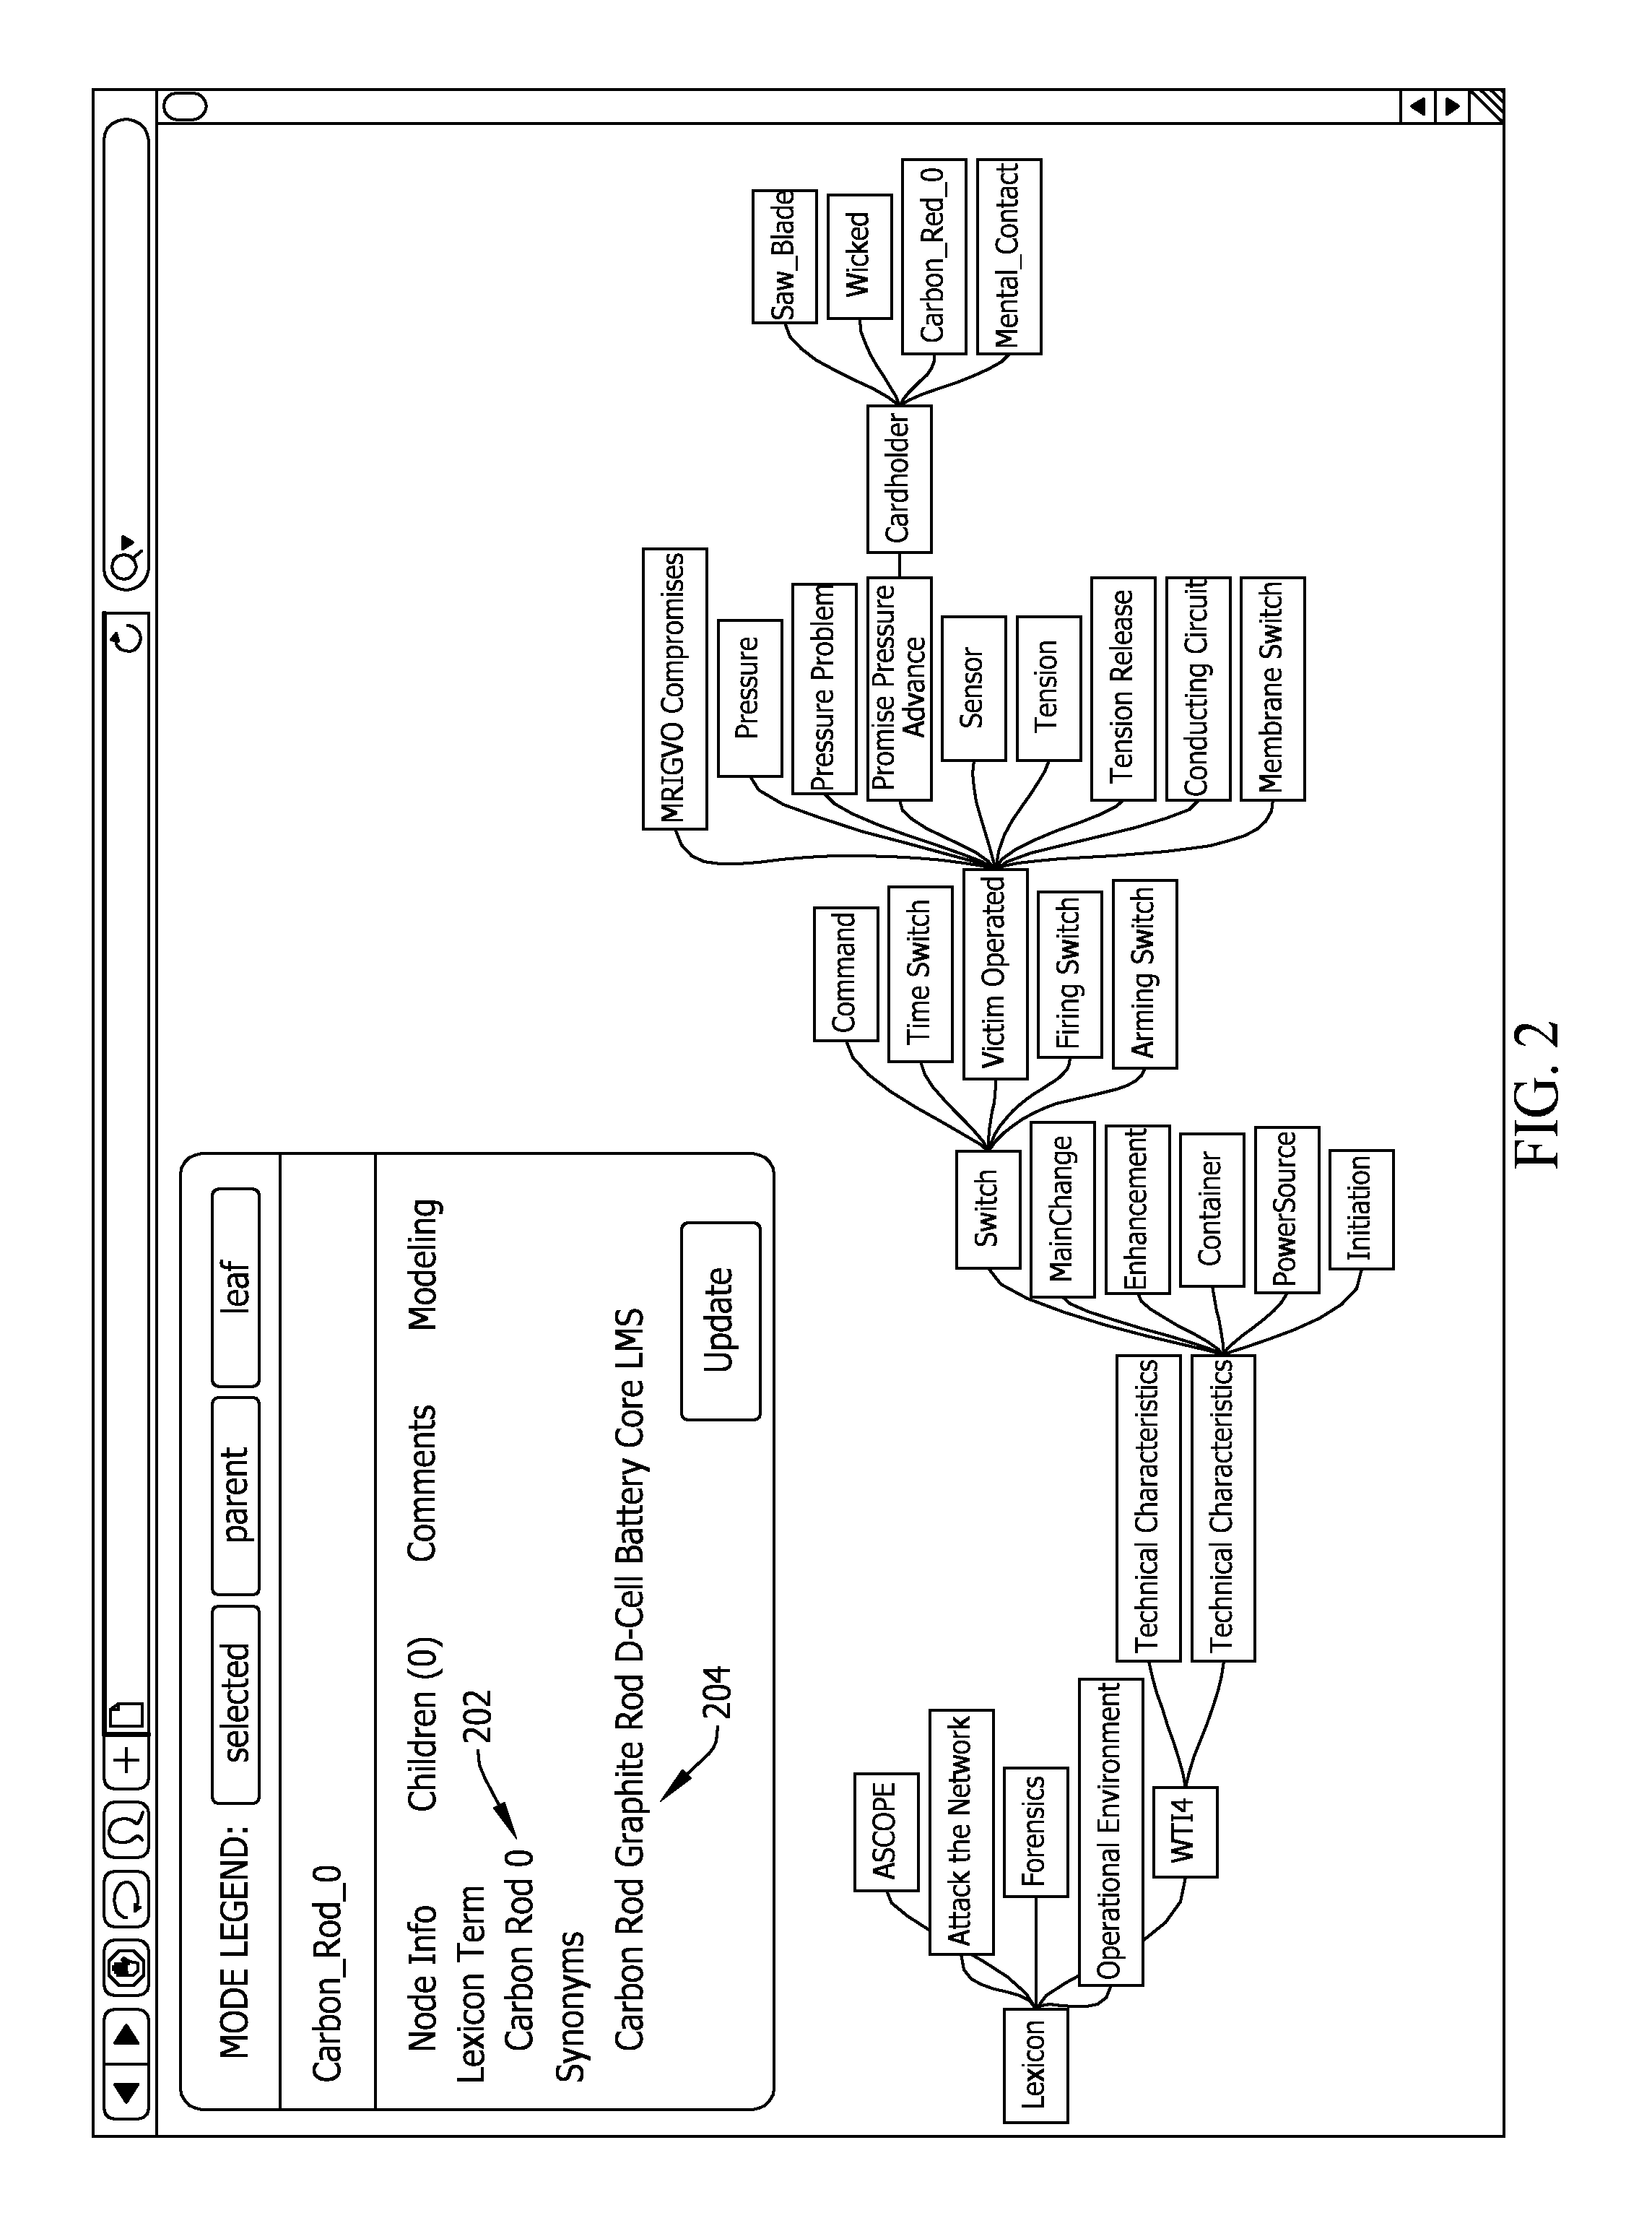 System and method for analyzing items using lexicon analysis and filtering process